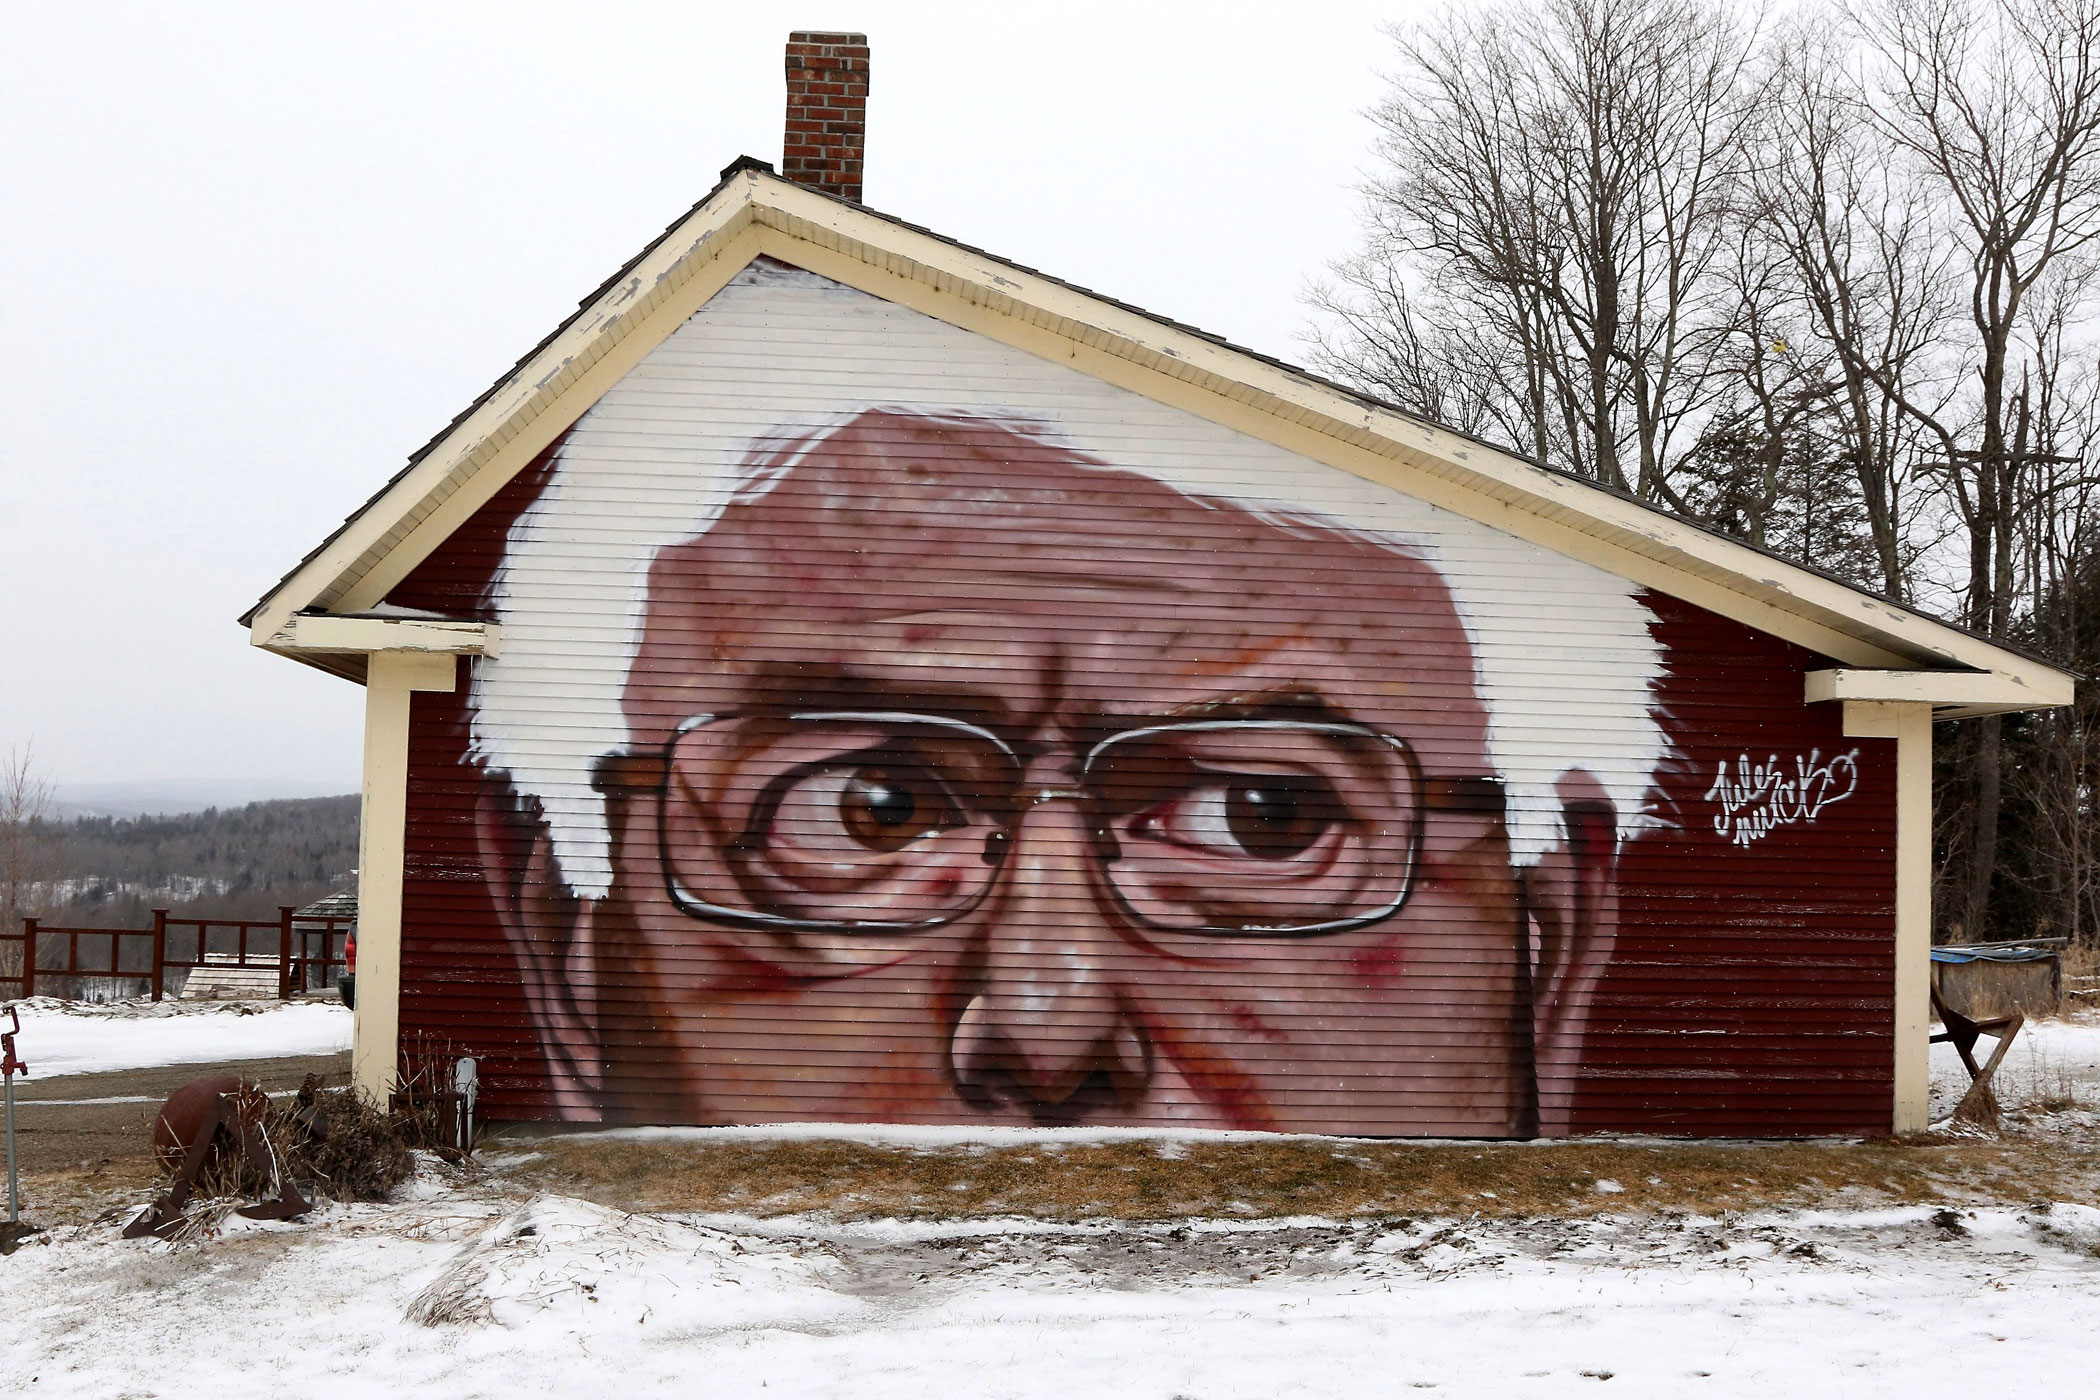 The likeness of Democratic presidential candidate, Vermont Sen. Bernie Sanders is painted on a barn in Kirby, Vt. on March 5, 2016.